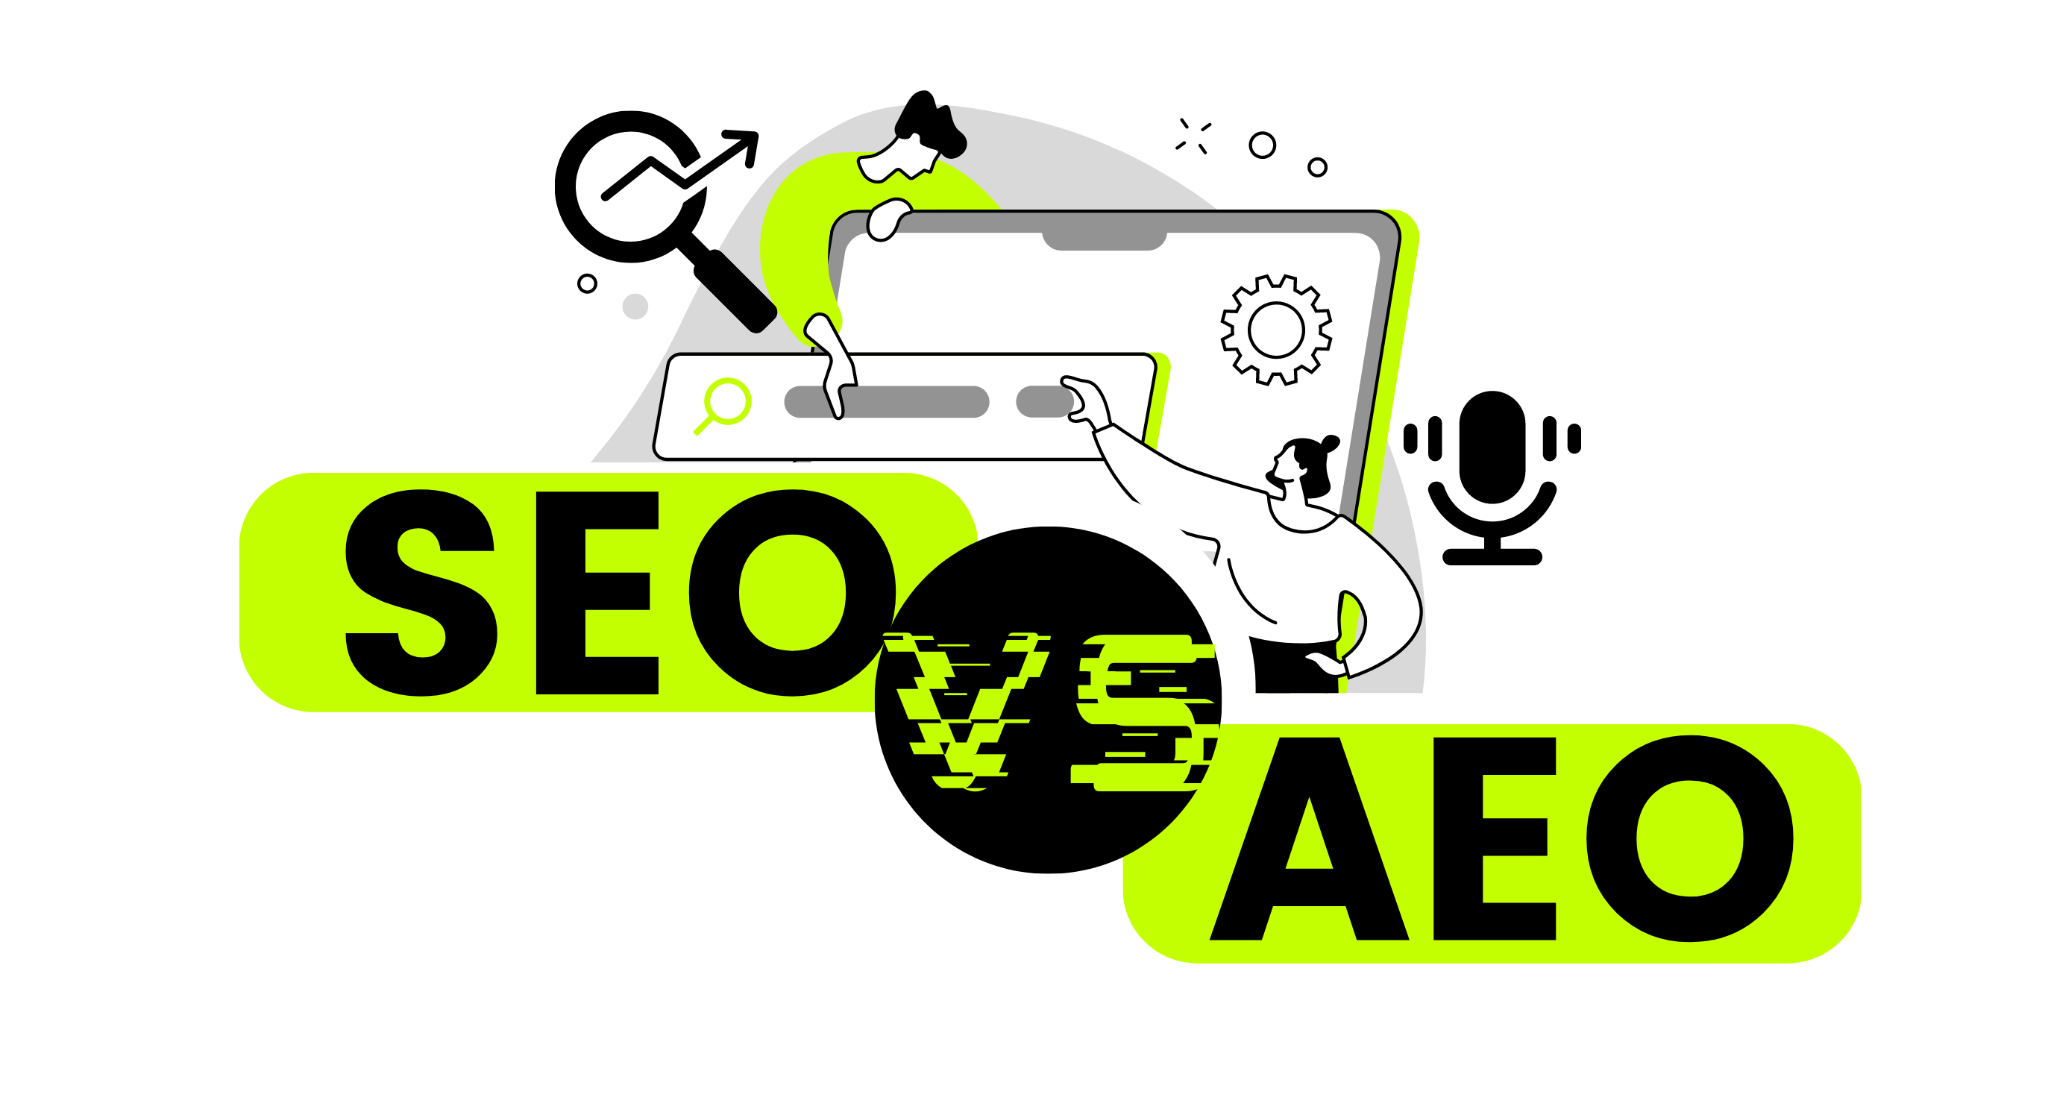 Your Questions About Answer Engine Optimization (AEO) Answered